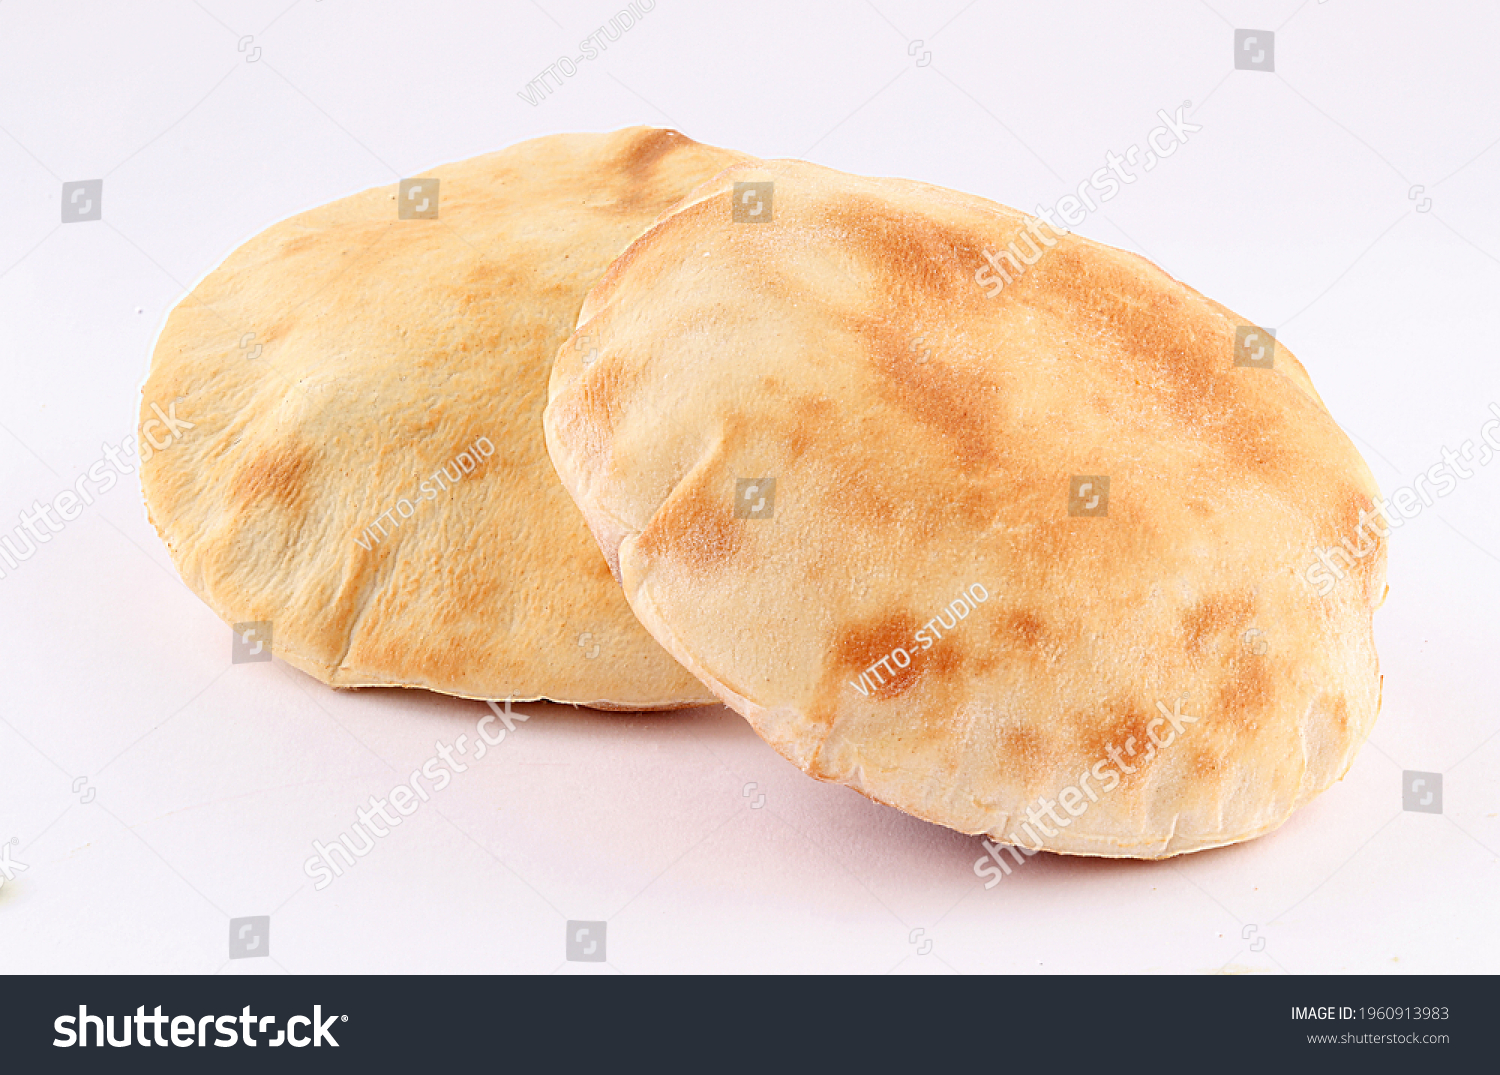 small arabic lebnani bread isolated on white background #1960913983